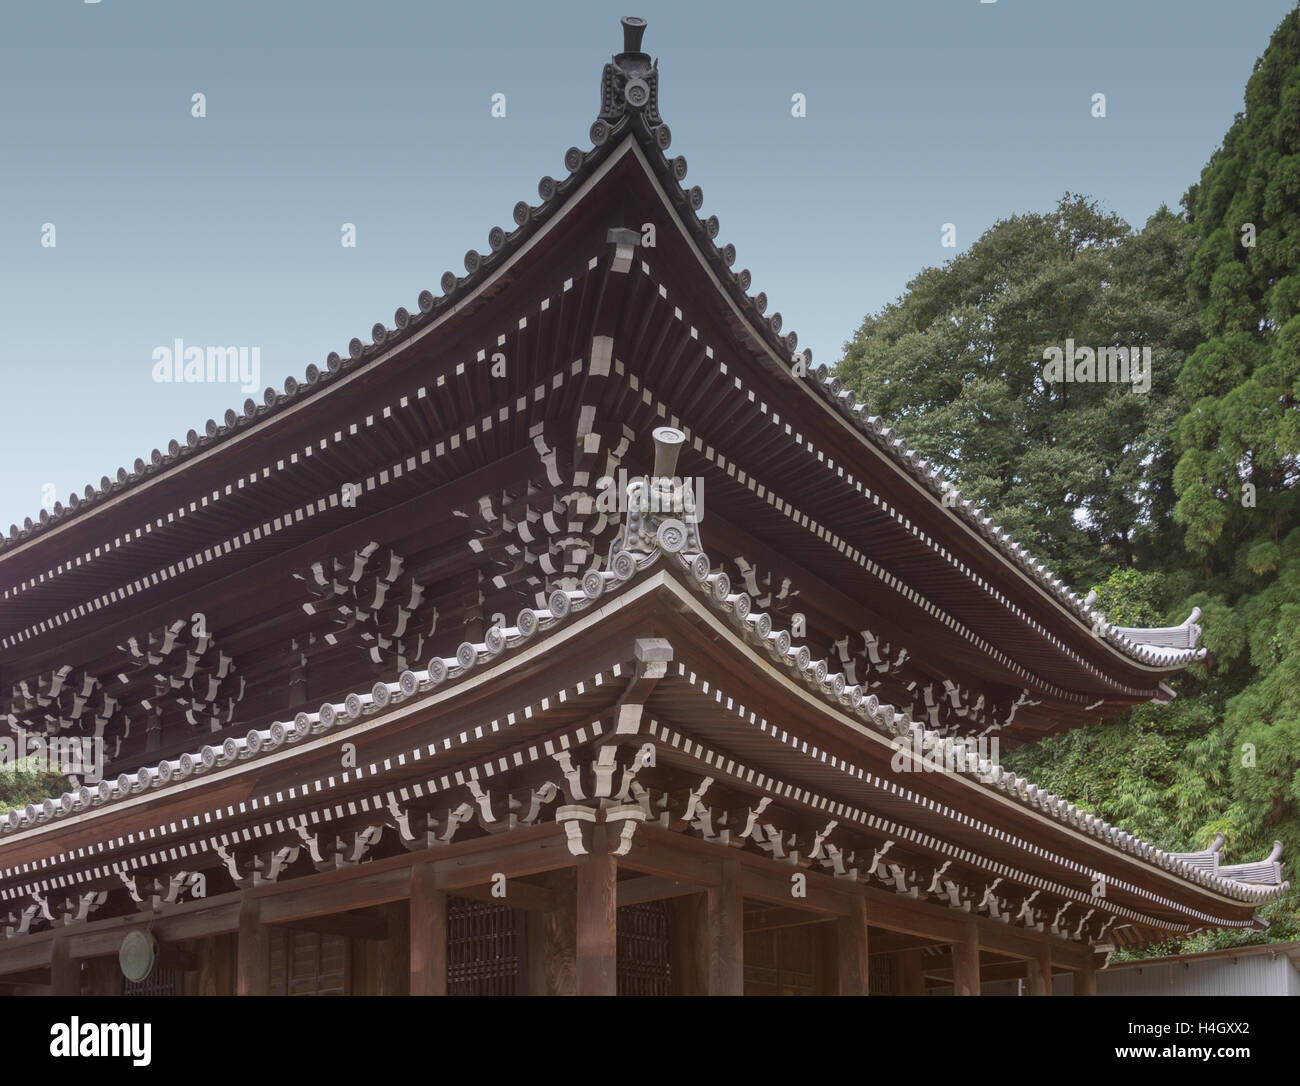 Roof structure of shrine at Chion-in Buddhist temple. Stock Photo